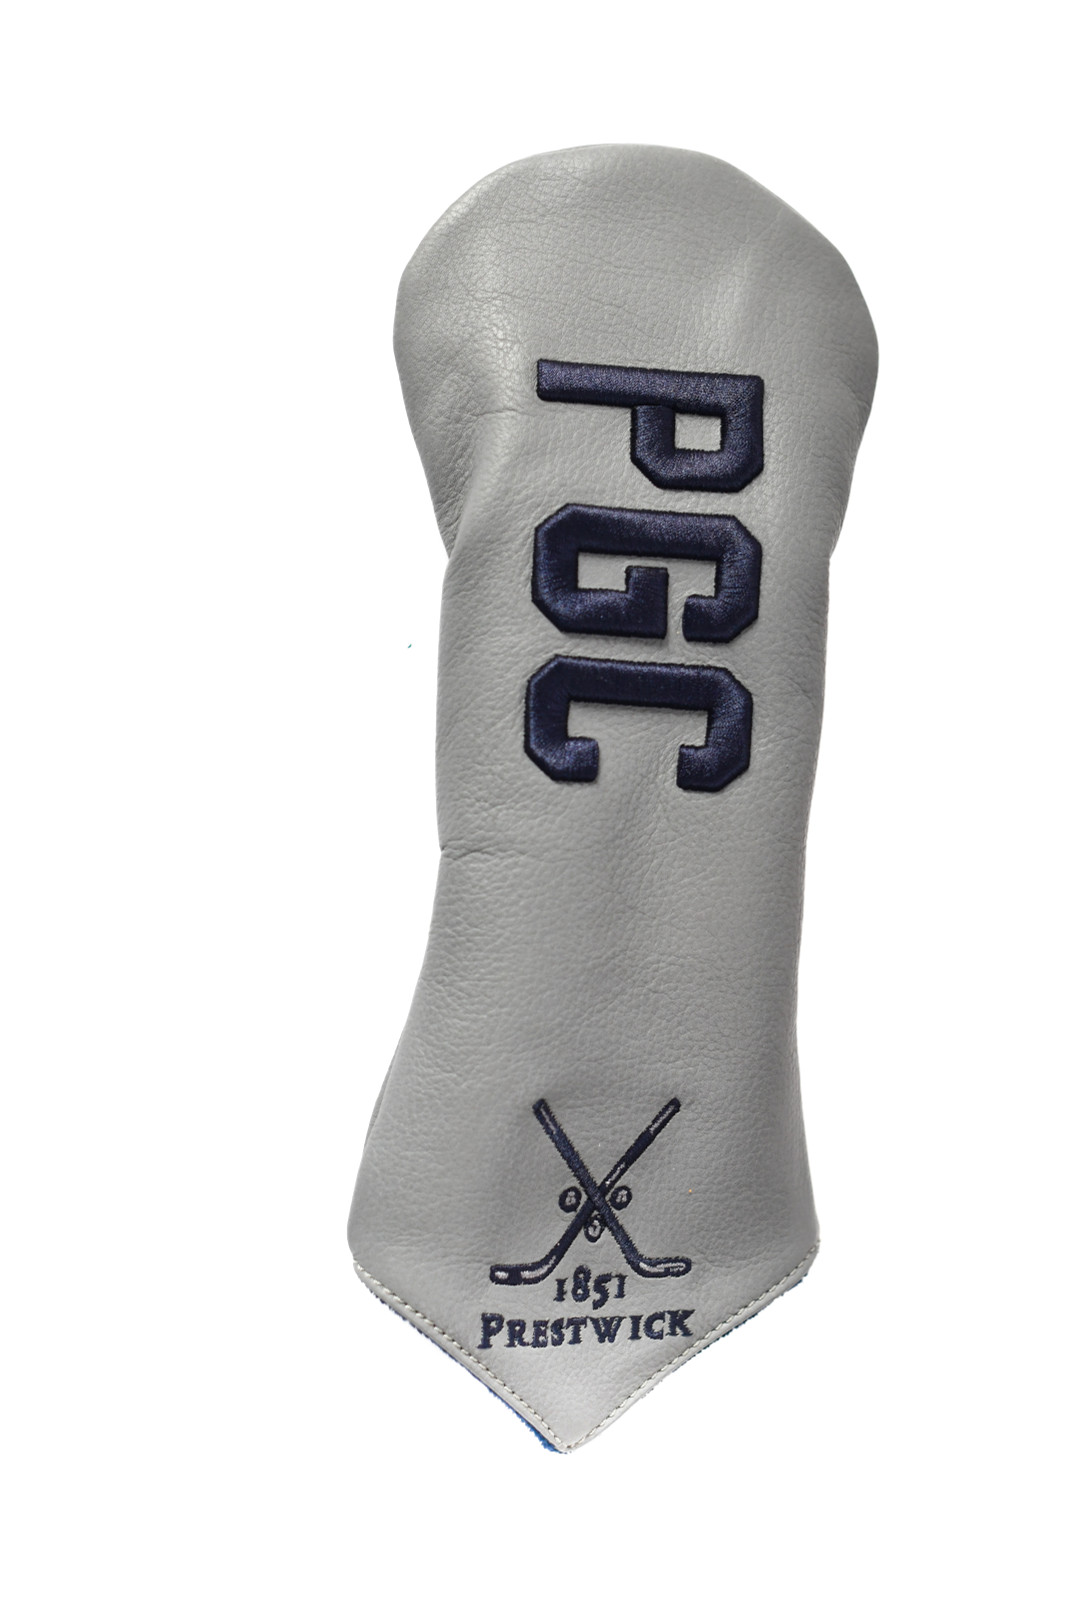 Prestwick 'Limited' Leather PGC Headcover - Silver